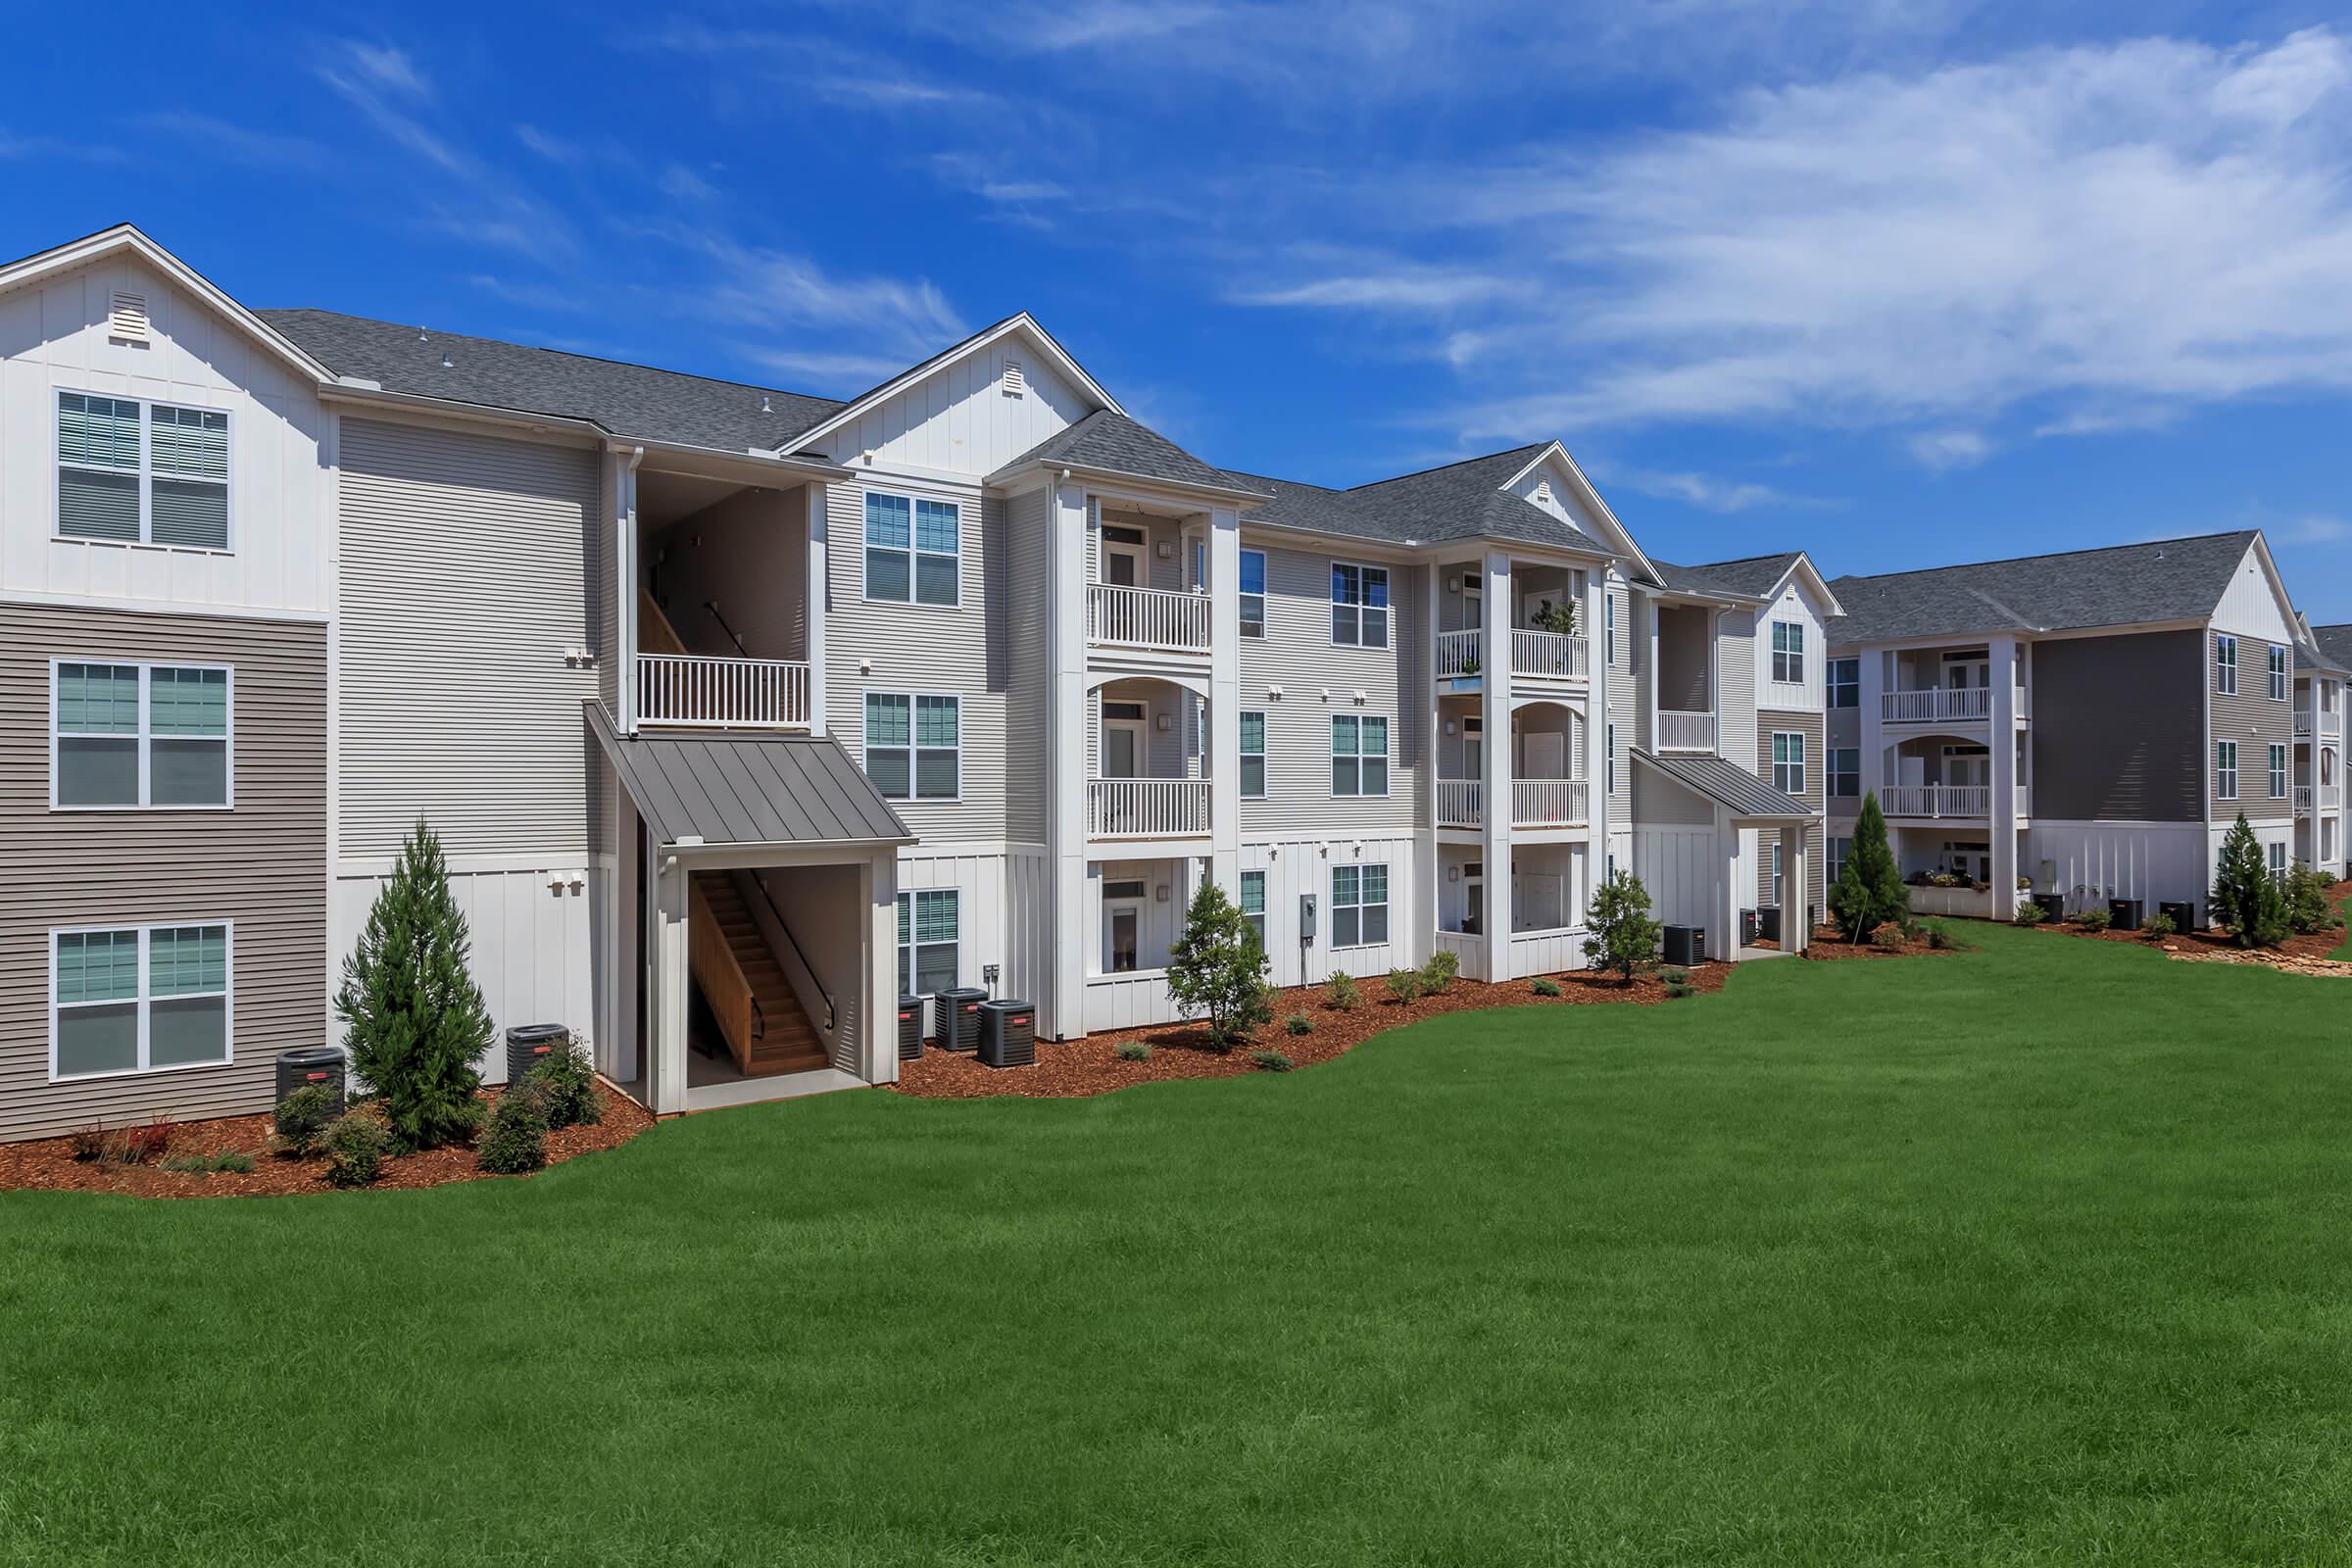 Welcome To Riverstone Apartments At Long Shoals In Arden, NC